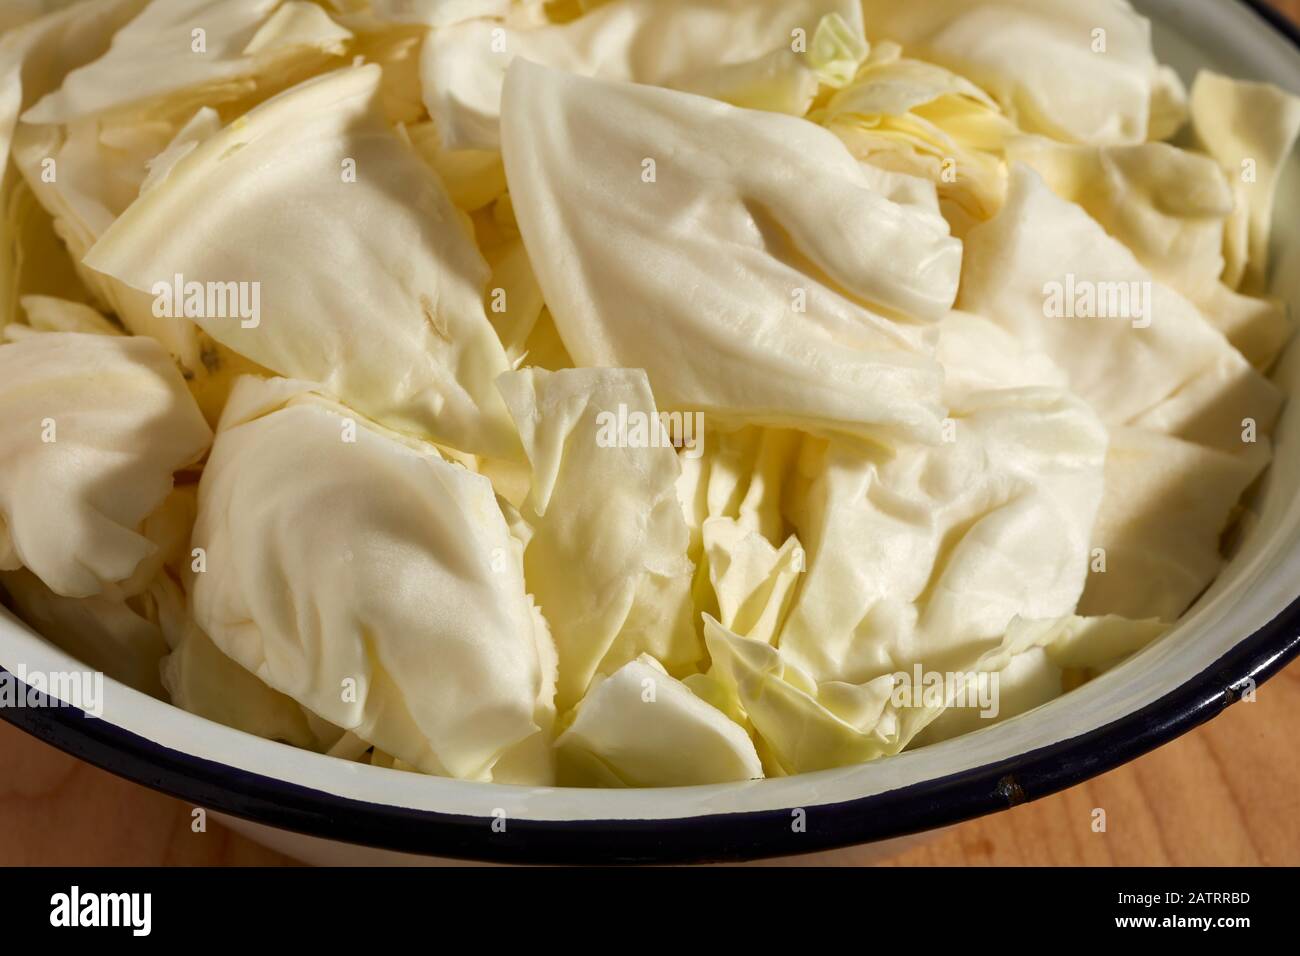 A bowl of chopped pieces of green cabbage Stock Photo